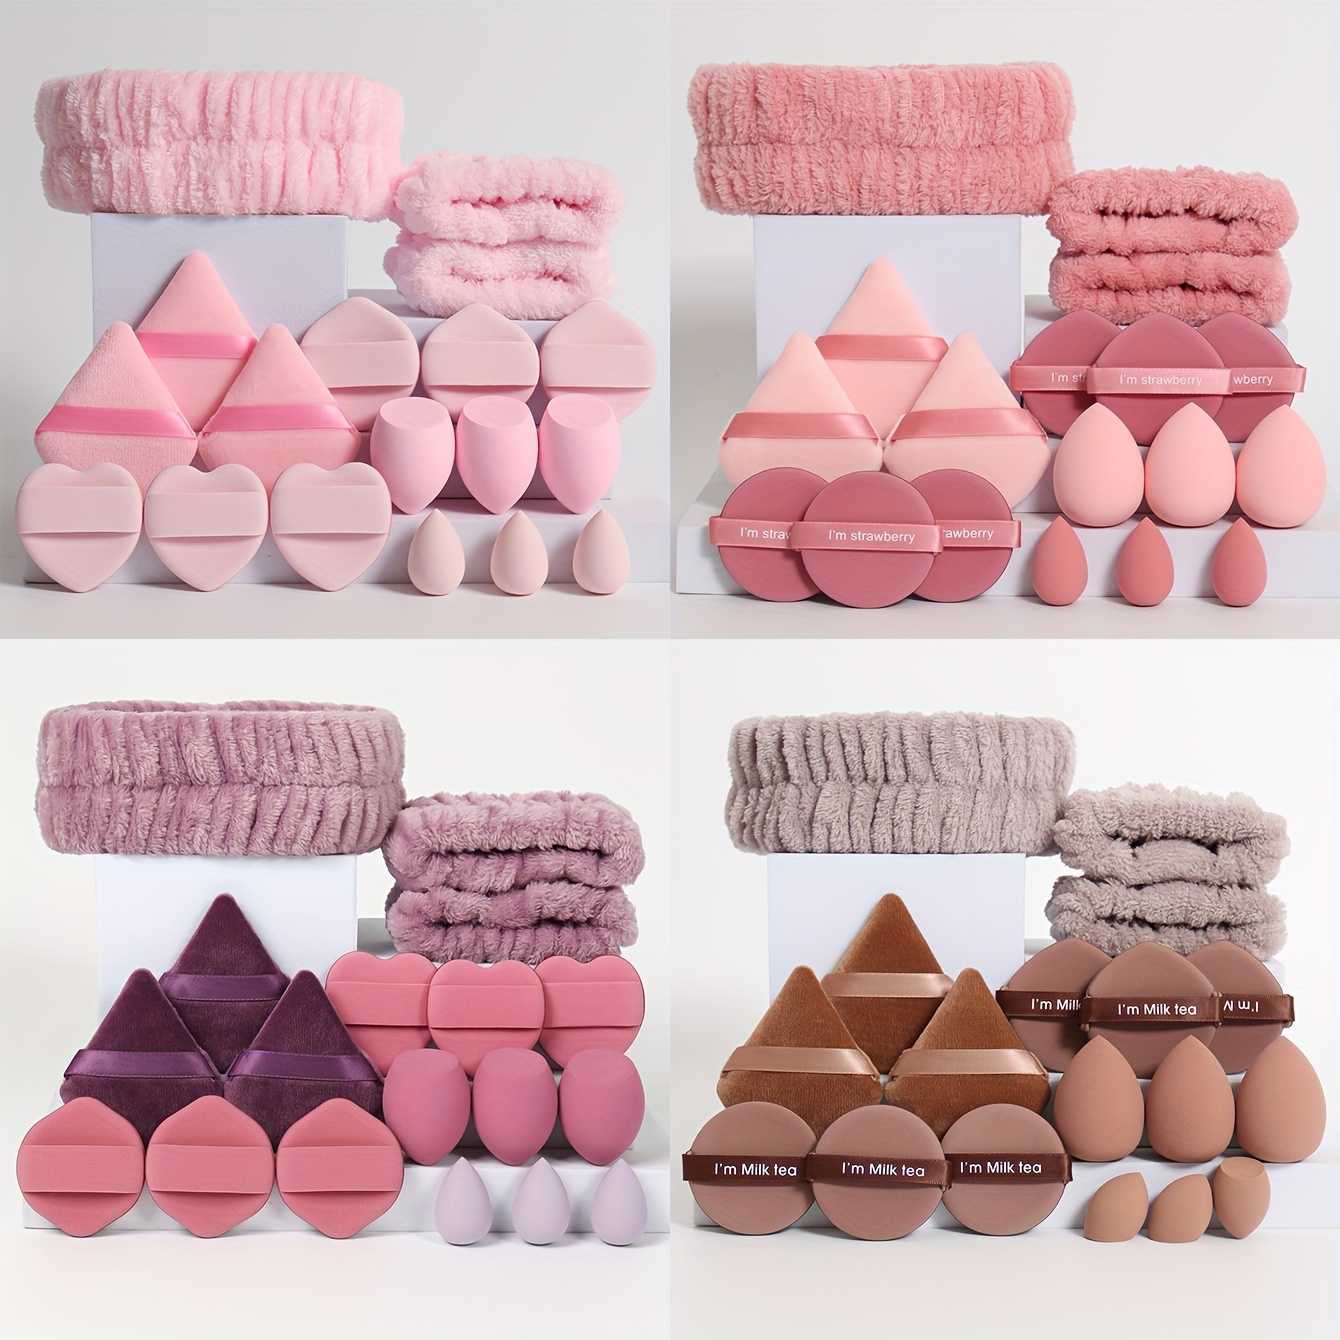 

18-piece Makeup Tool Set - Headband & Wrist Bands, Blending Sponges, Mini Sponges, Triangle Powder Puffs, & Air Cushion Puffs, Suitable For All Skin Types